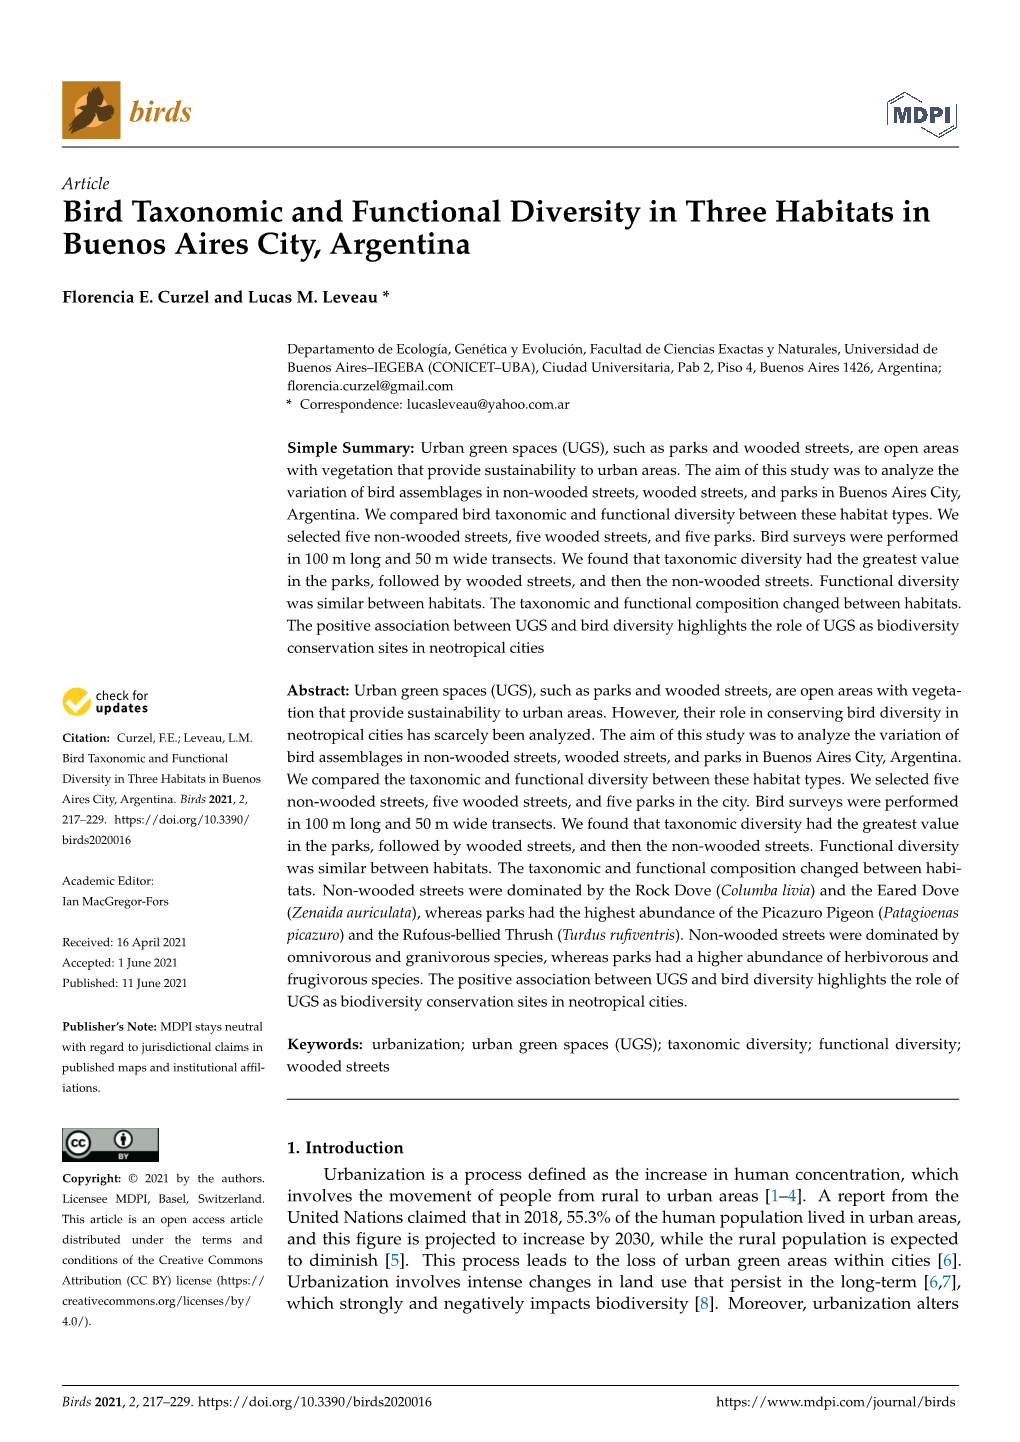 Bird Taxonomic and Functional Diversity in Three Habitats in Buenos Aires City, Argentina